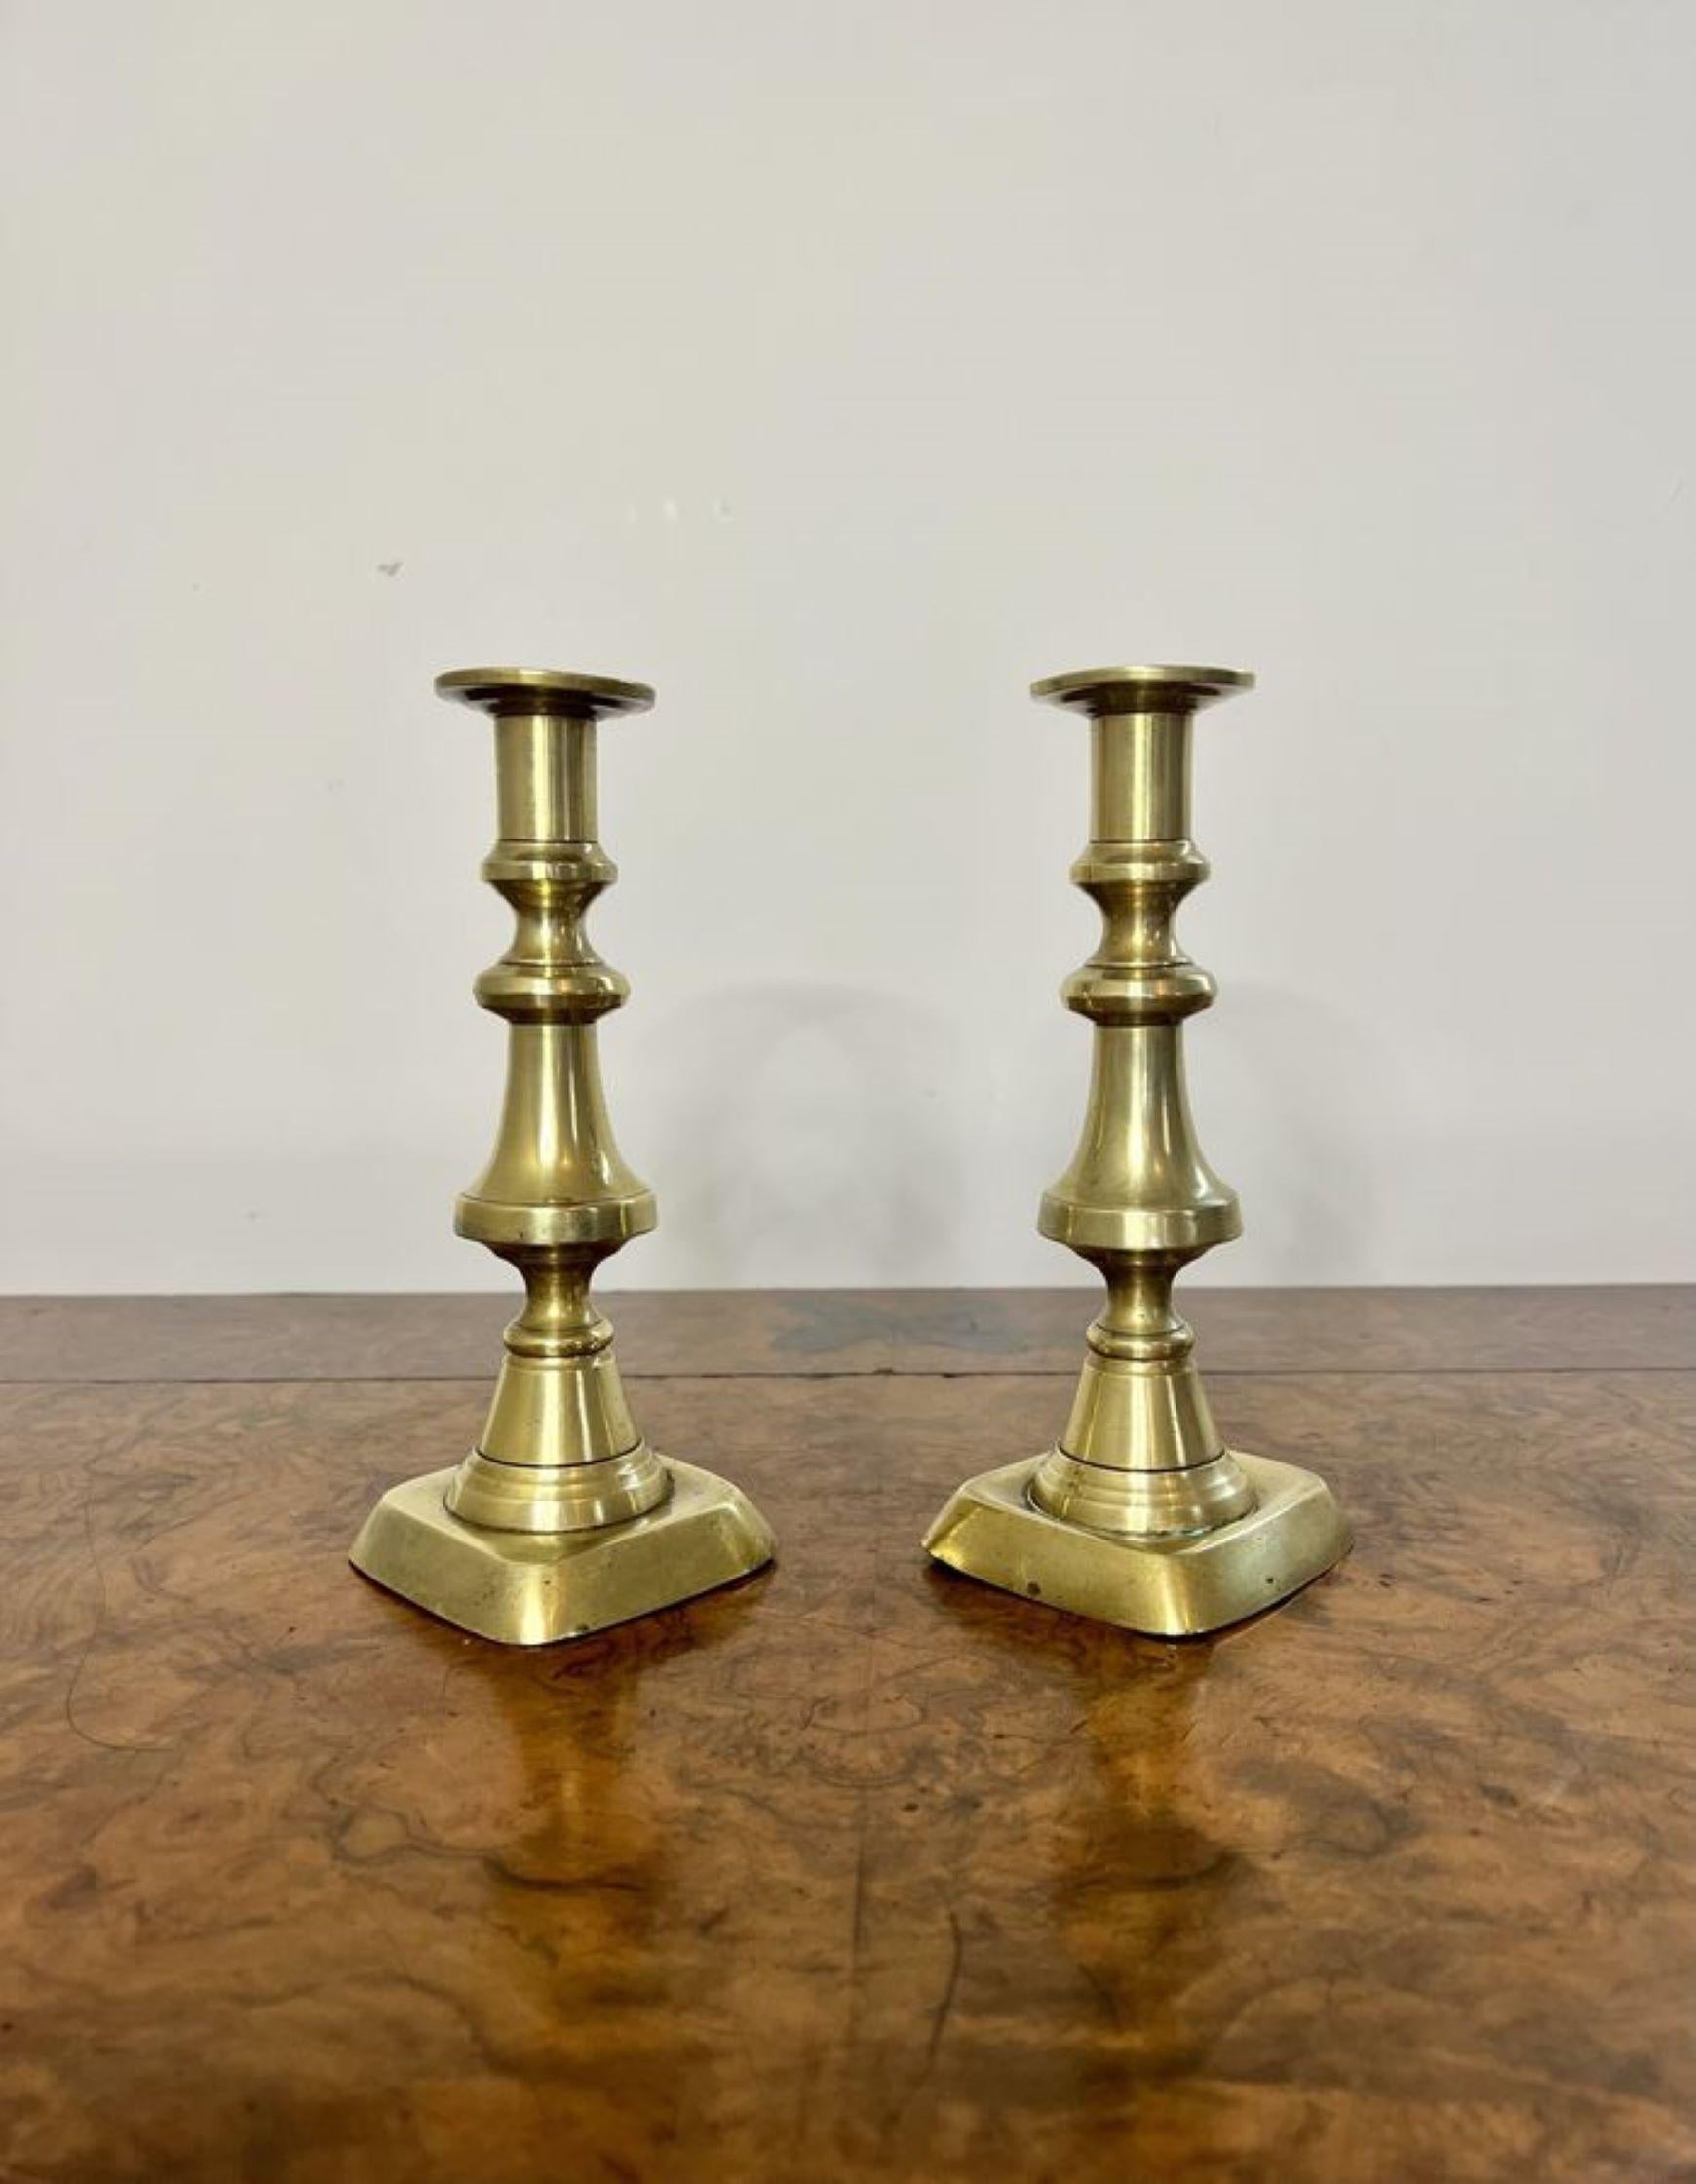 Quality pair of antique Victorian brass candlesticks having a quality pair of brass candlesticks with turned shaped columns standing on square bases.

D. 1860